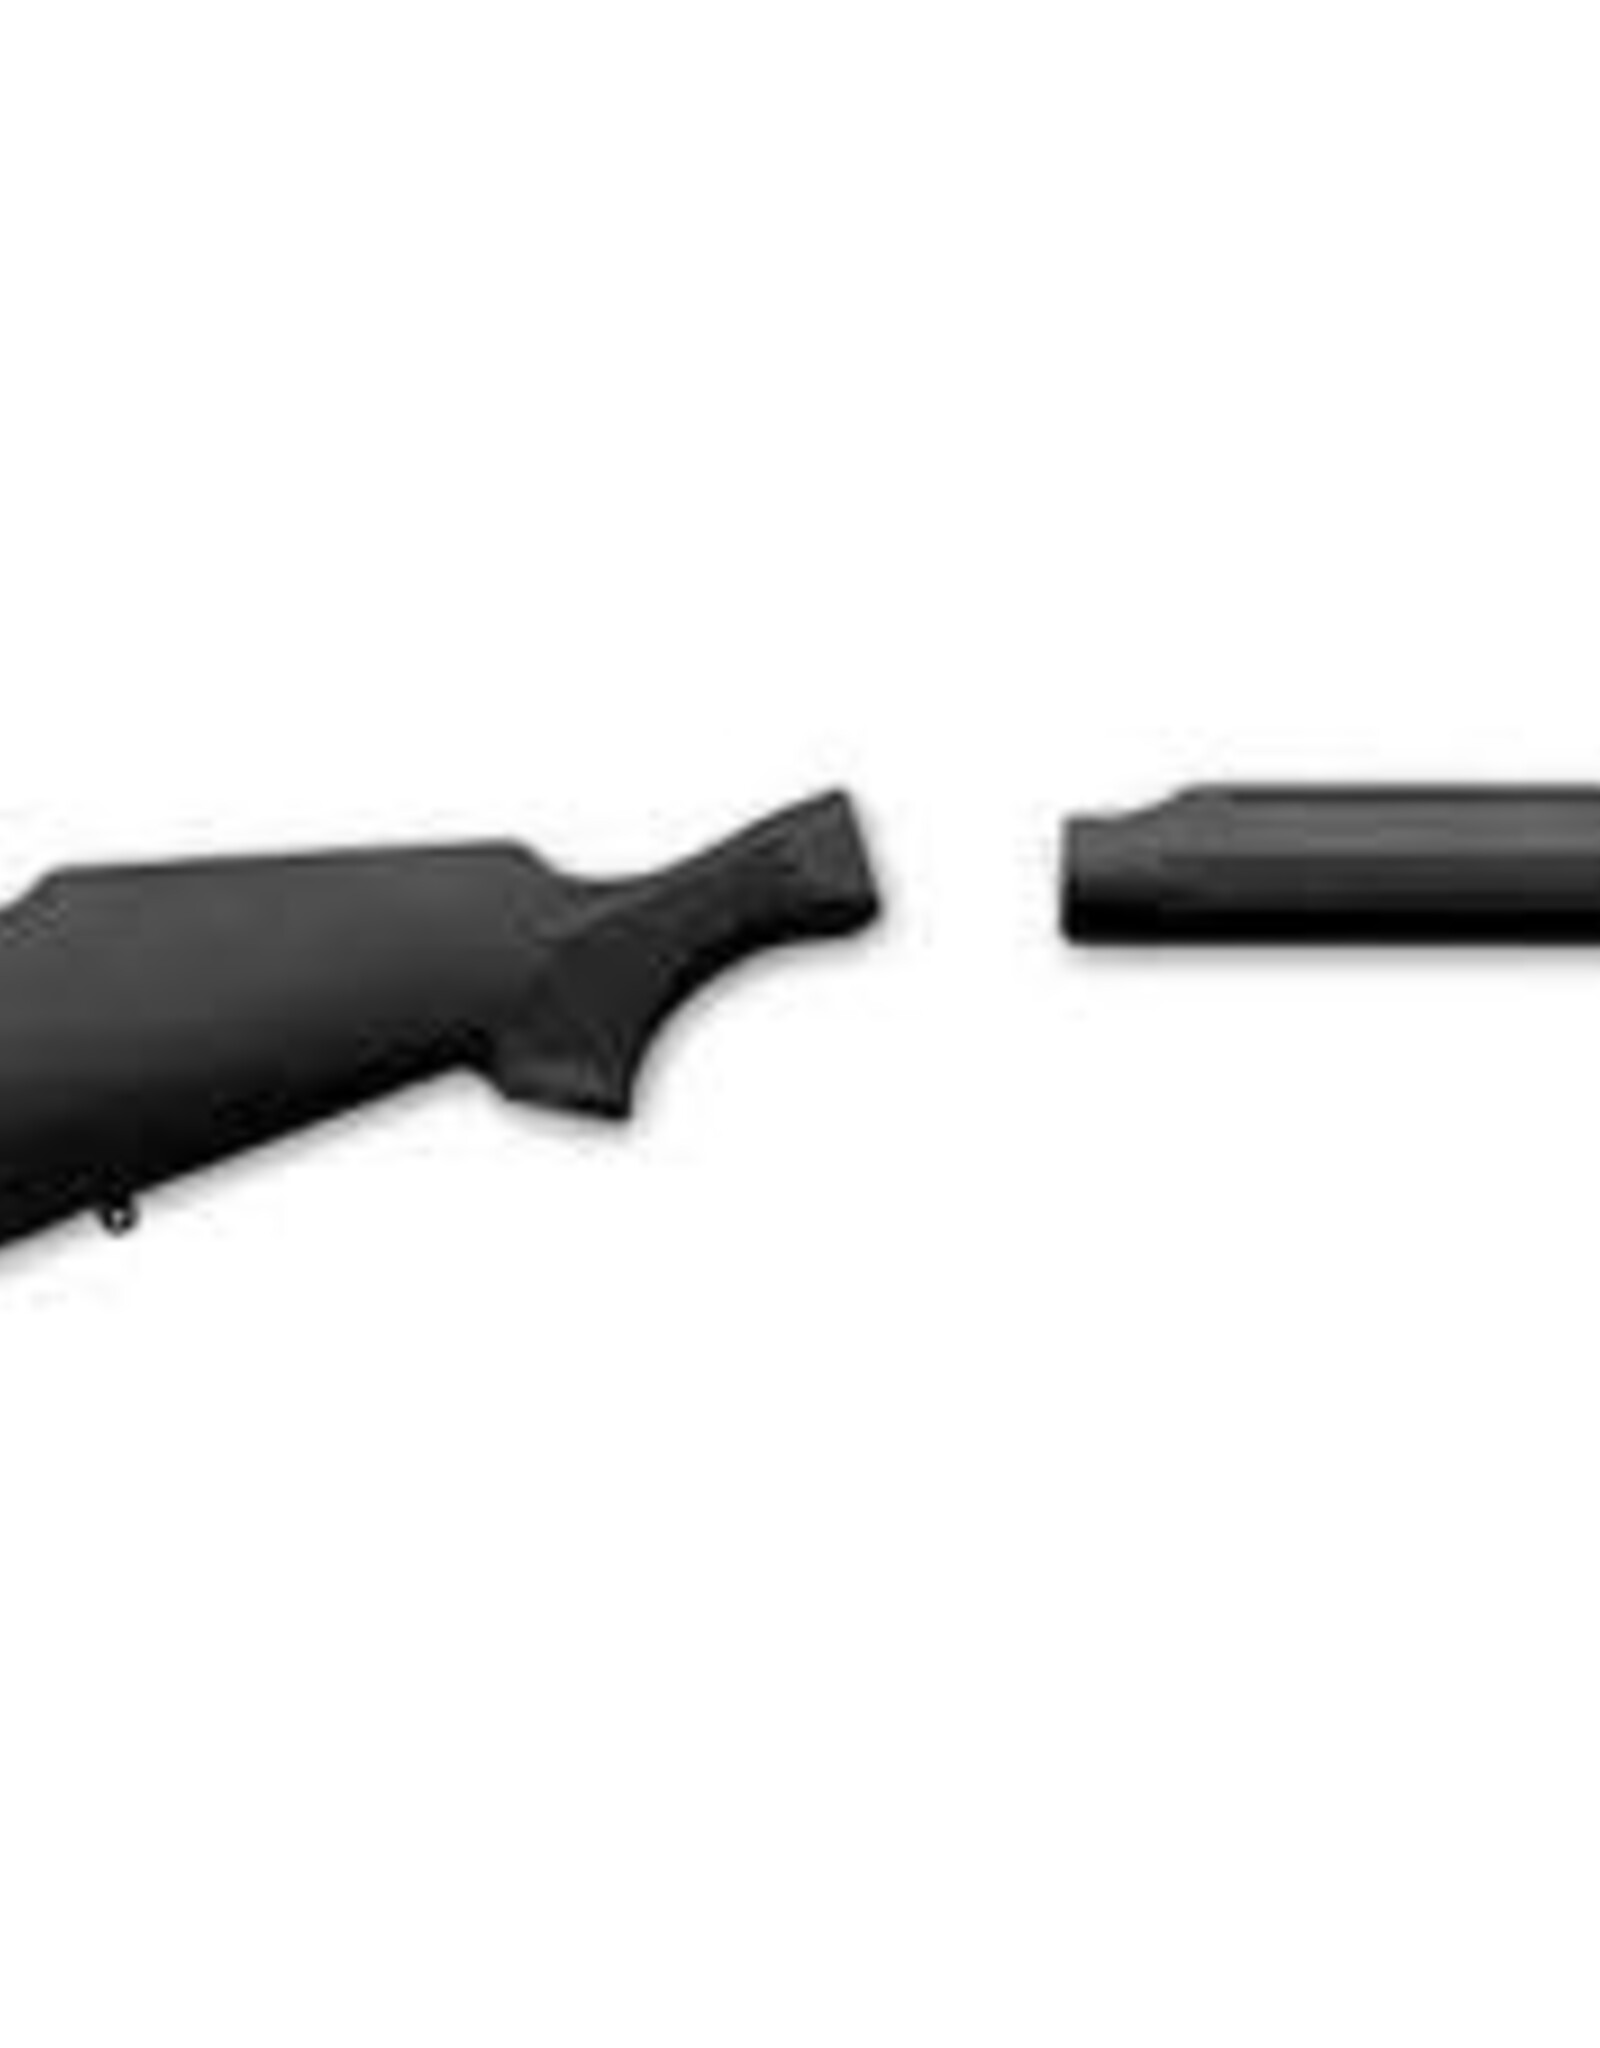 Remington Model 870 Stock & Fore-End For 12 Gauge